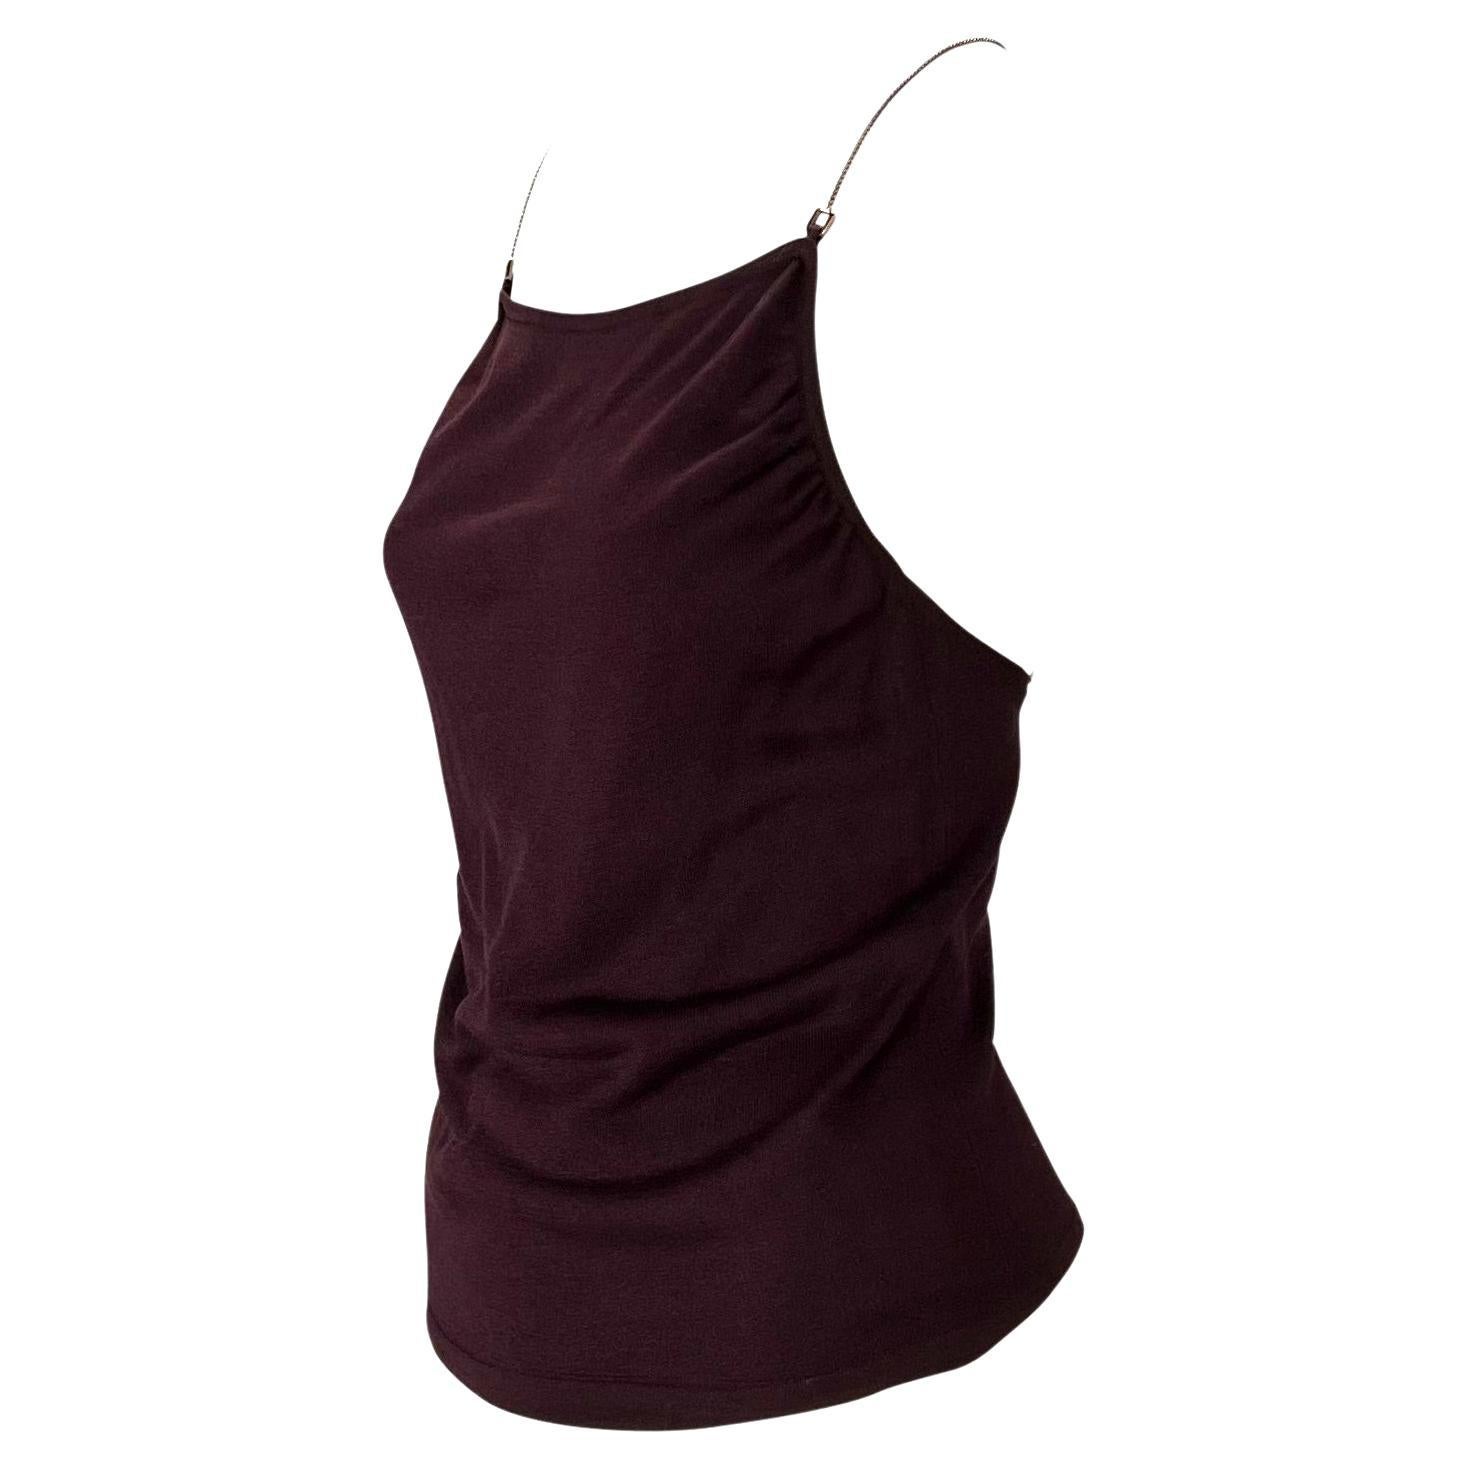 Presenting a burgundy silk Gucci tank top, designed by Tom Ford. From the late 1990s, this top is constructed entirely of silk and features a square neckline and semi-exposed back. This incredible top is made complete with tonal chain straps with